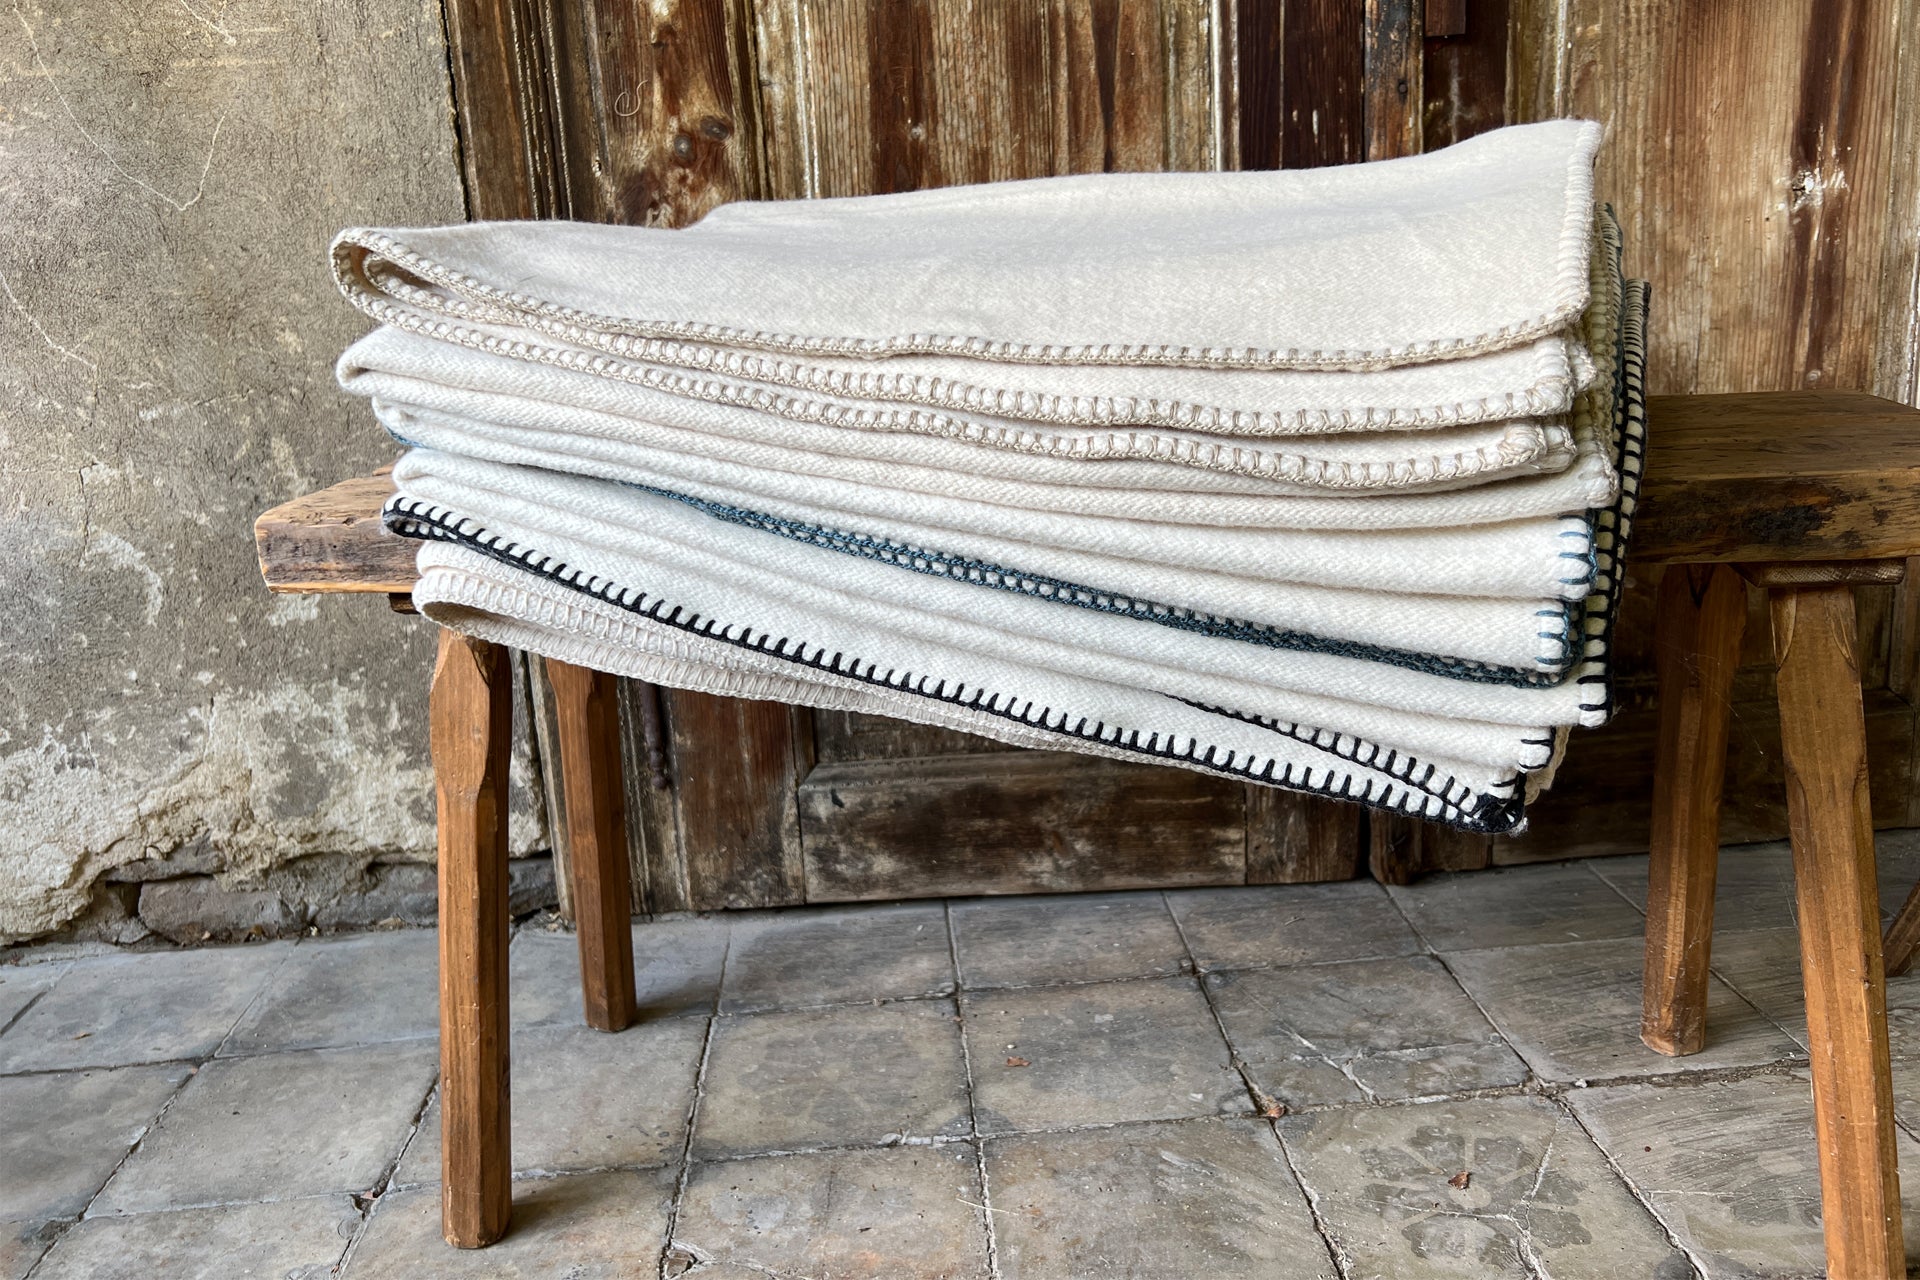 Blanket: Organic eco-cotton, hand stitched edging, Natural - BL82